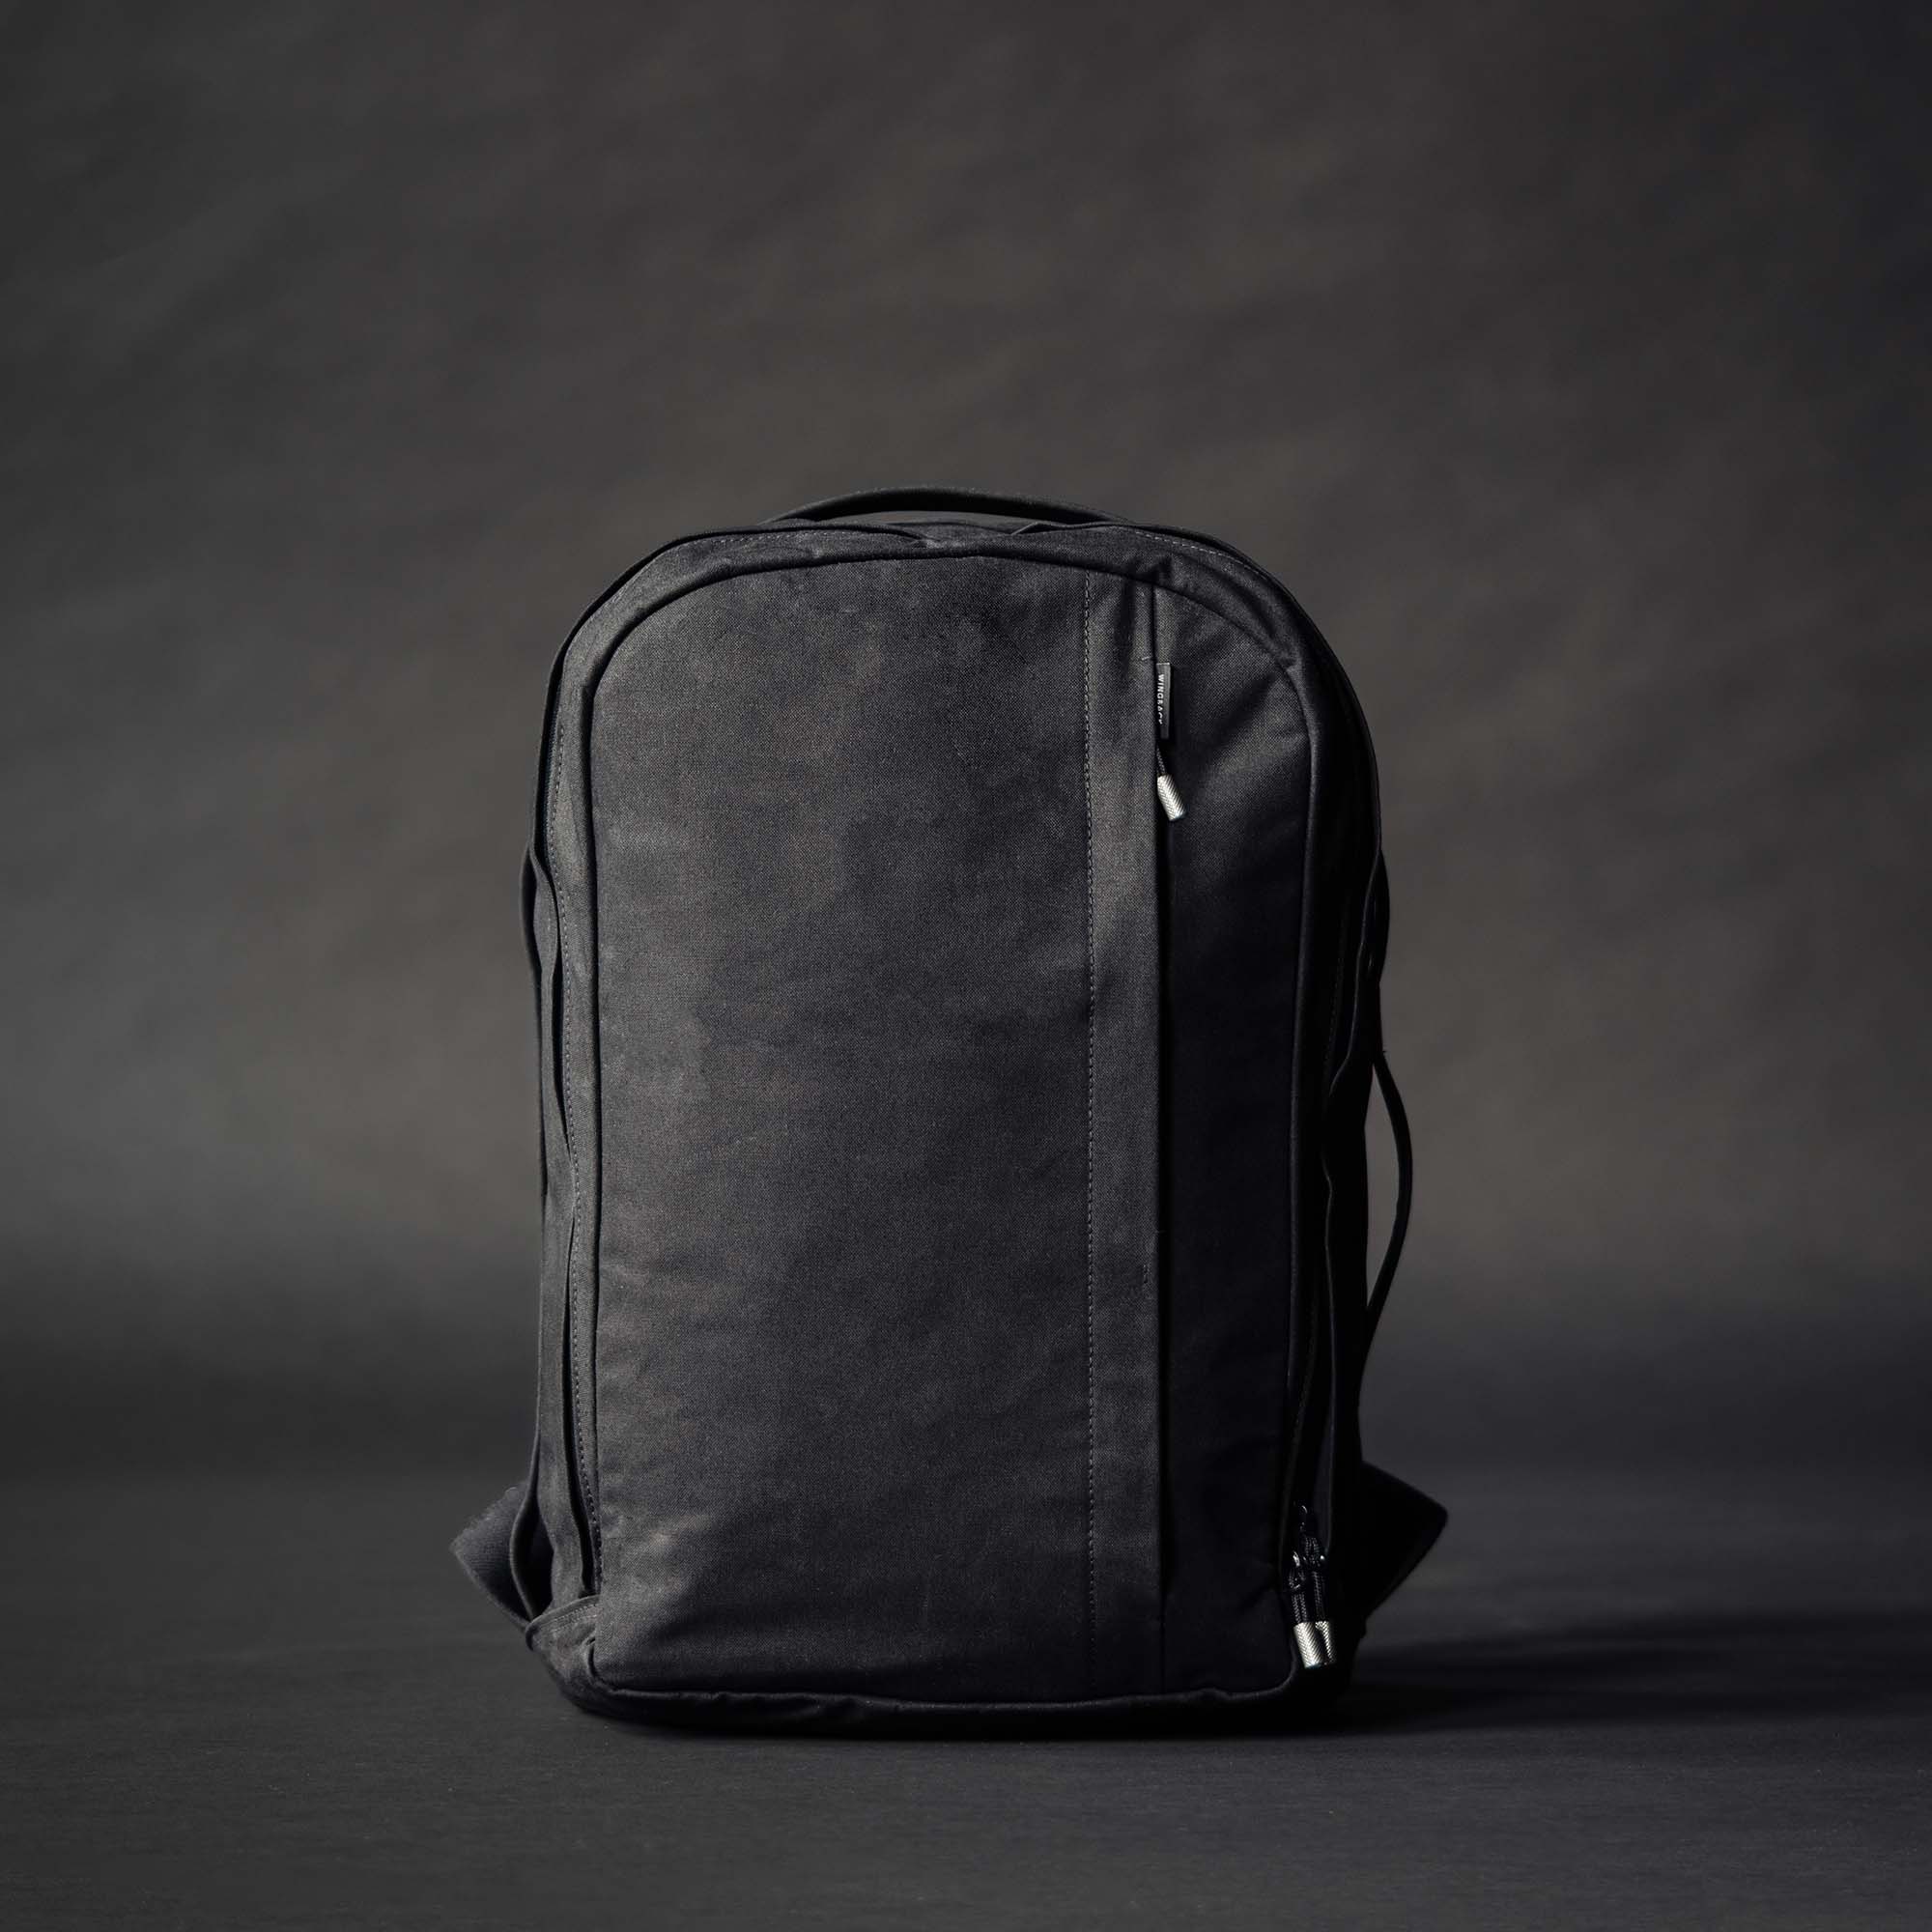 The Everyday Pack by Wingback – an organic waxed cotton backpack in black